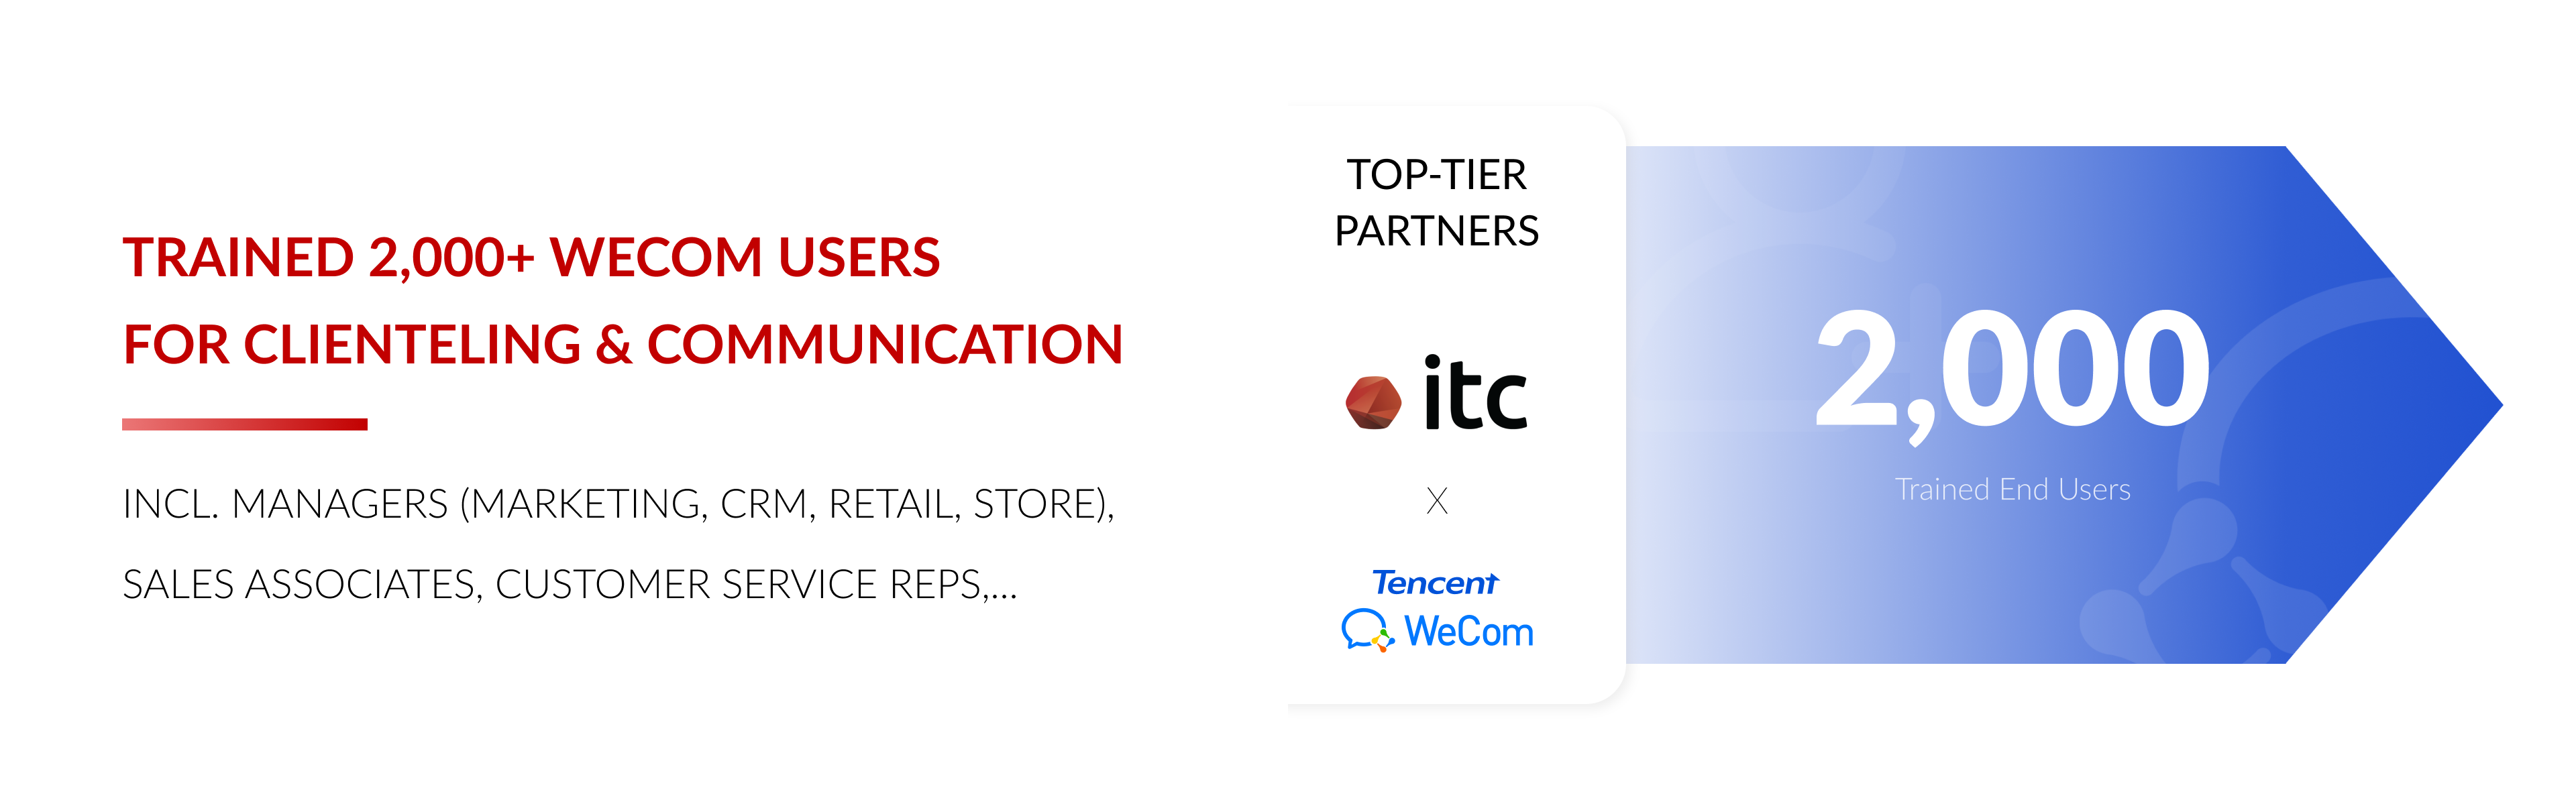 ITC has trained 2000+ WeCom users for clienteling and communication, including managers (Marketing, CRM, Retail, Store), sales associates, customer service representatives...